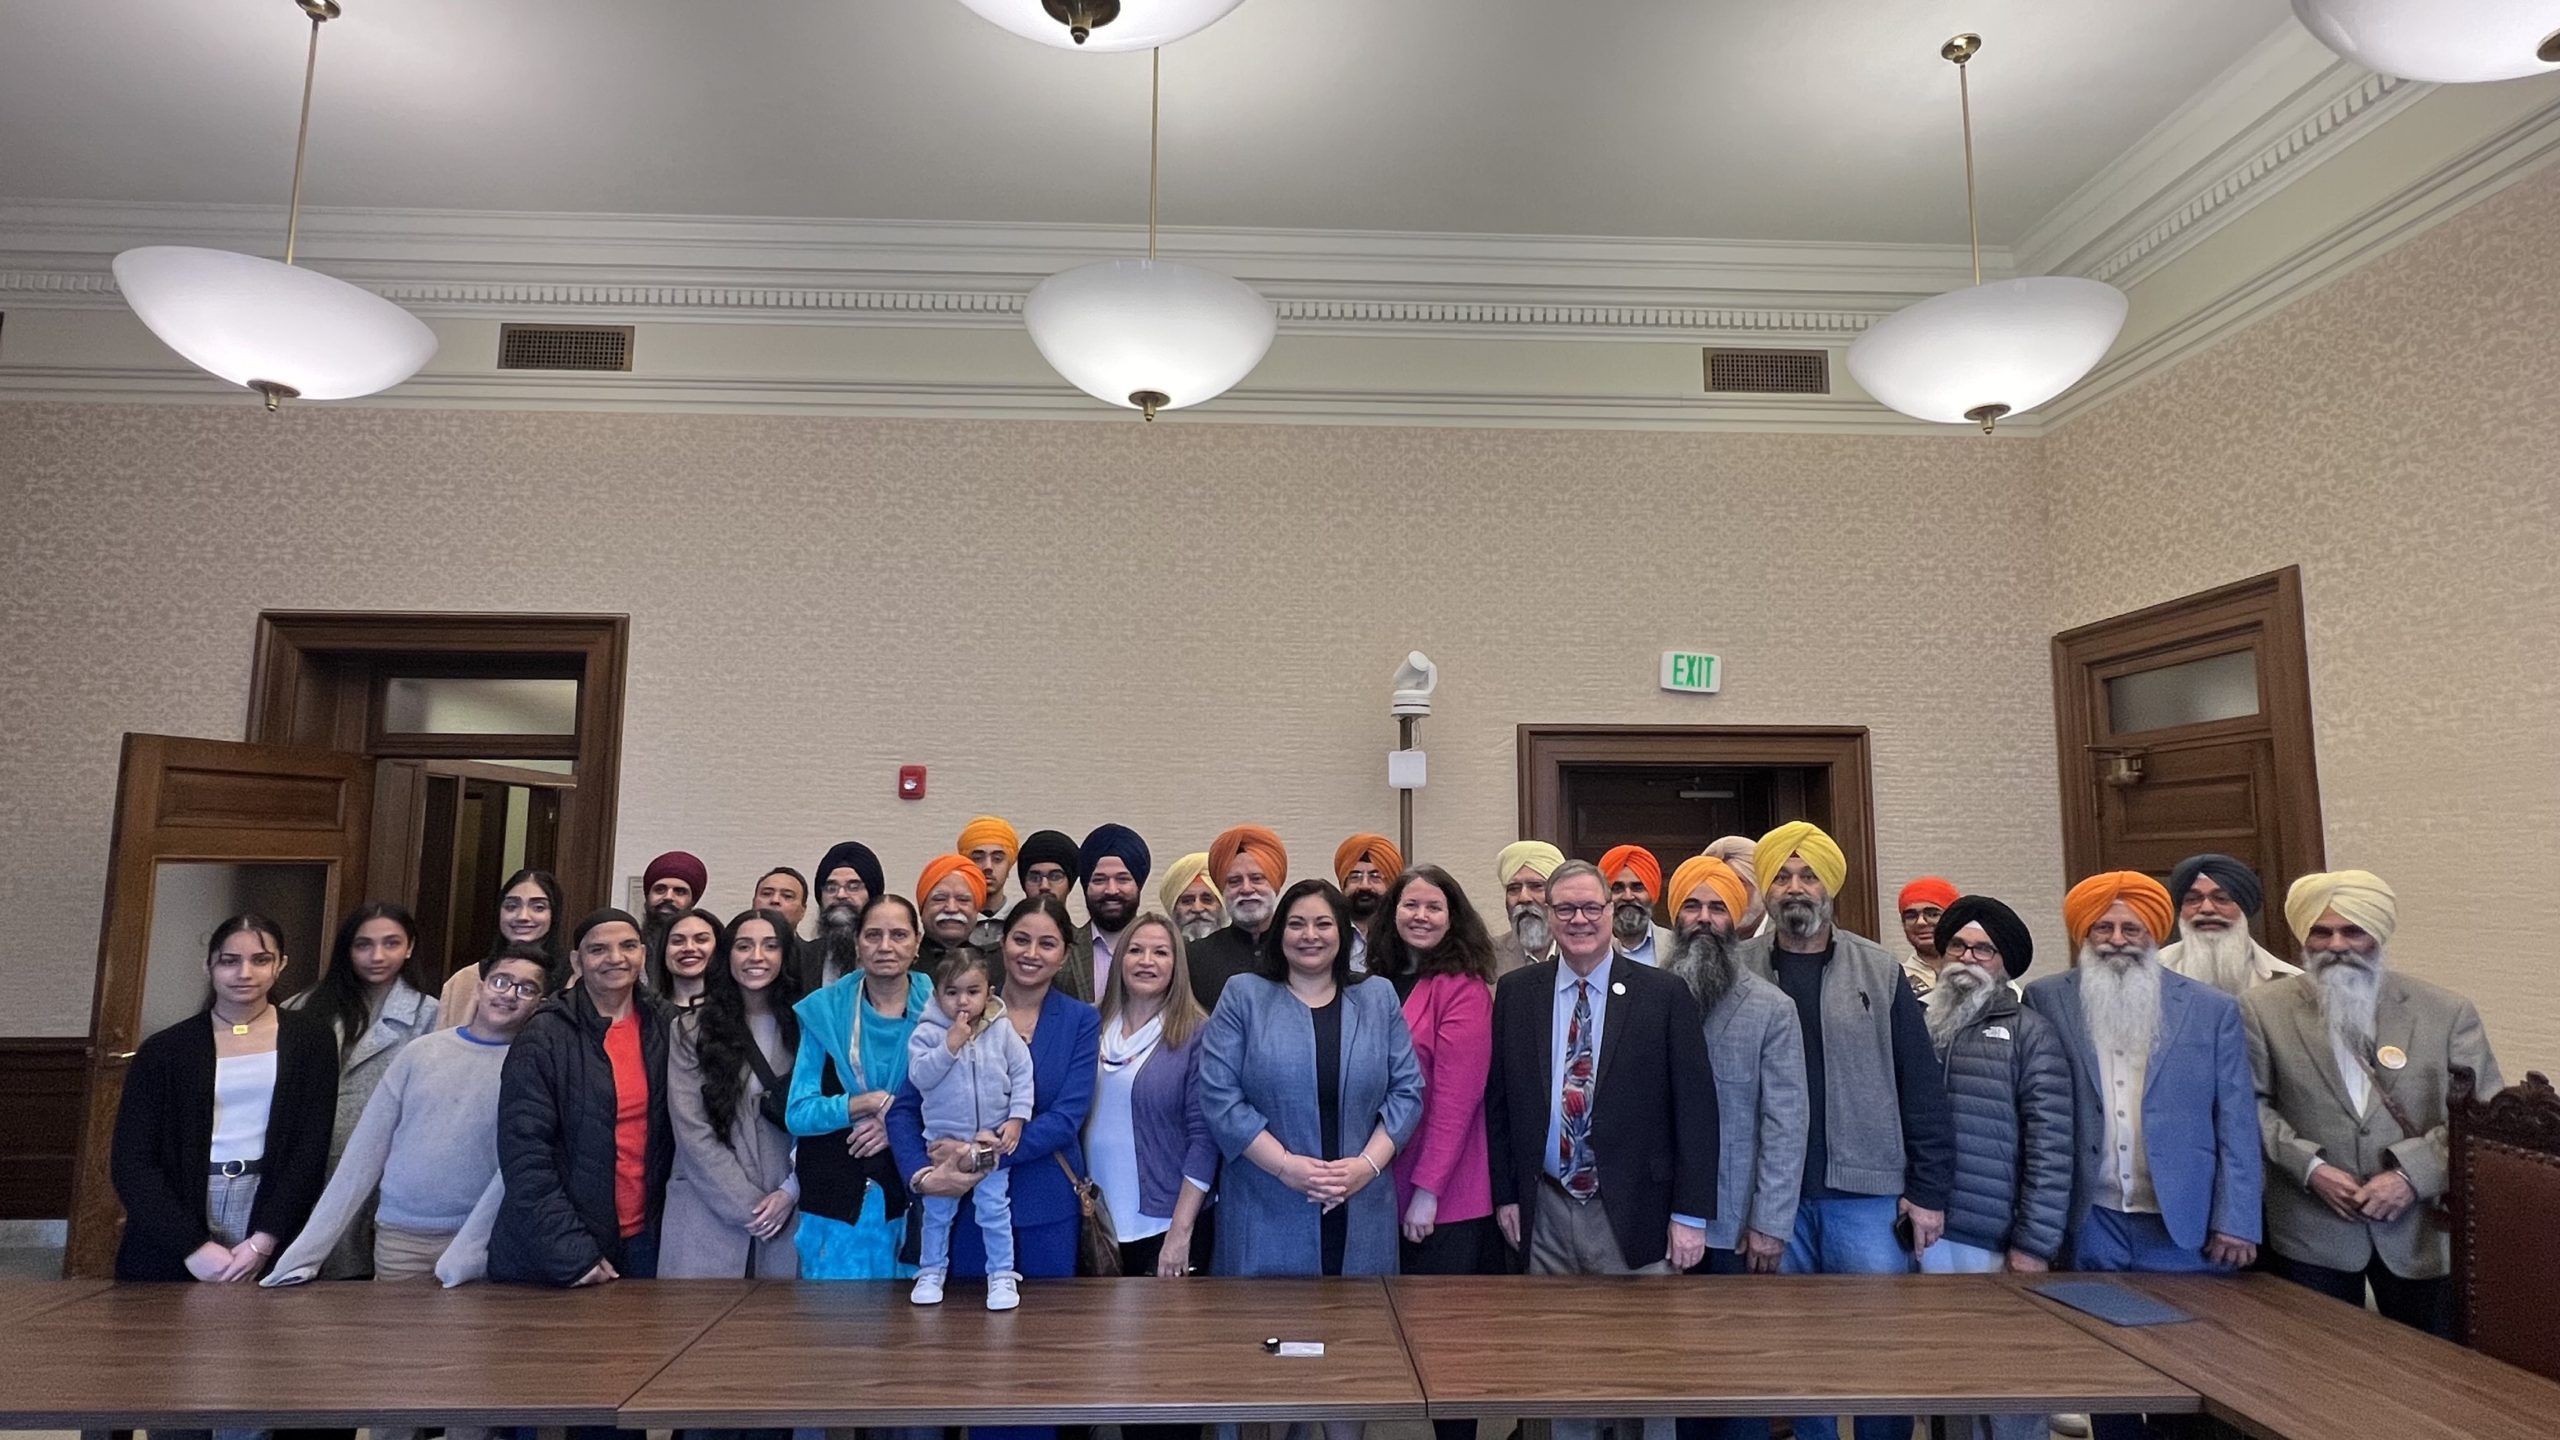 WSO on X: We are excited to announce the newest release of pictures in our  stock image project. Representation matters and so in our commitment to  portray the Sikh community with authenticity